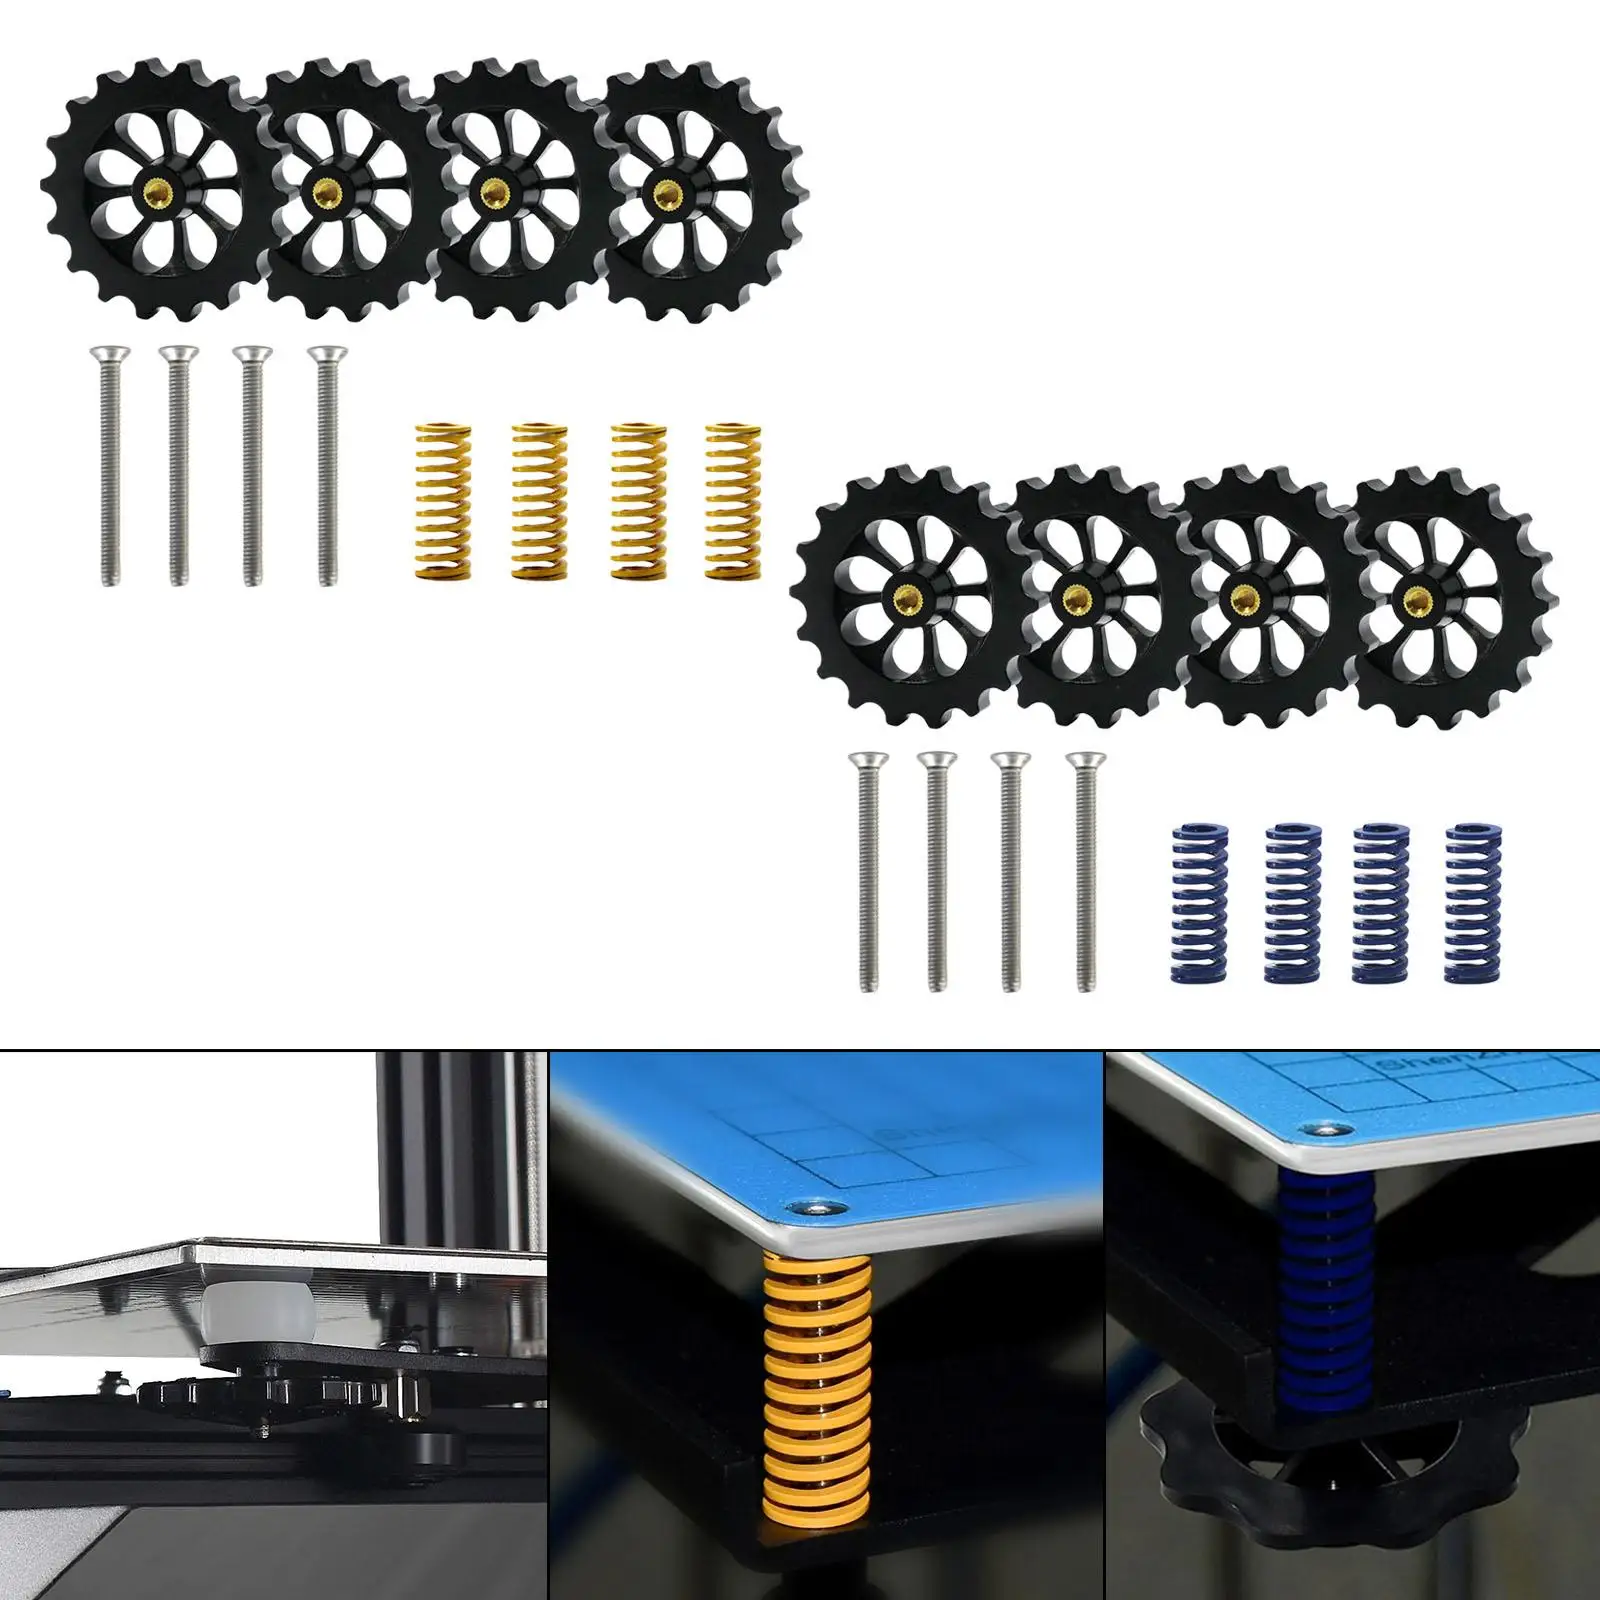 Stainless Steel Heatbed Leveling Kit M4 Screw Leveling Spring High Temperature Resistance 3D Printer Accessories